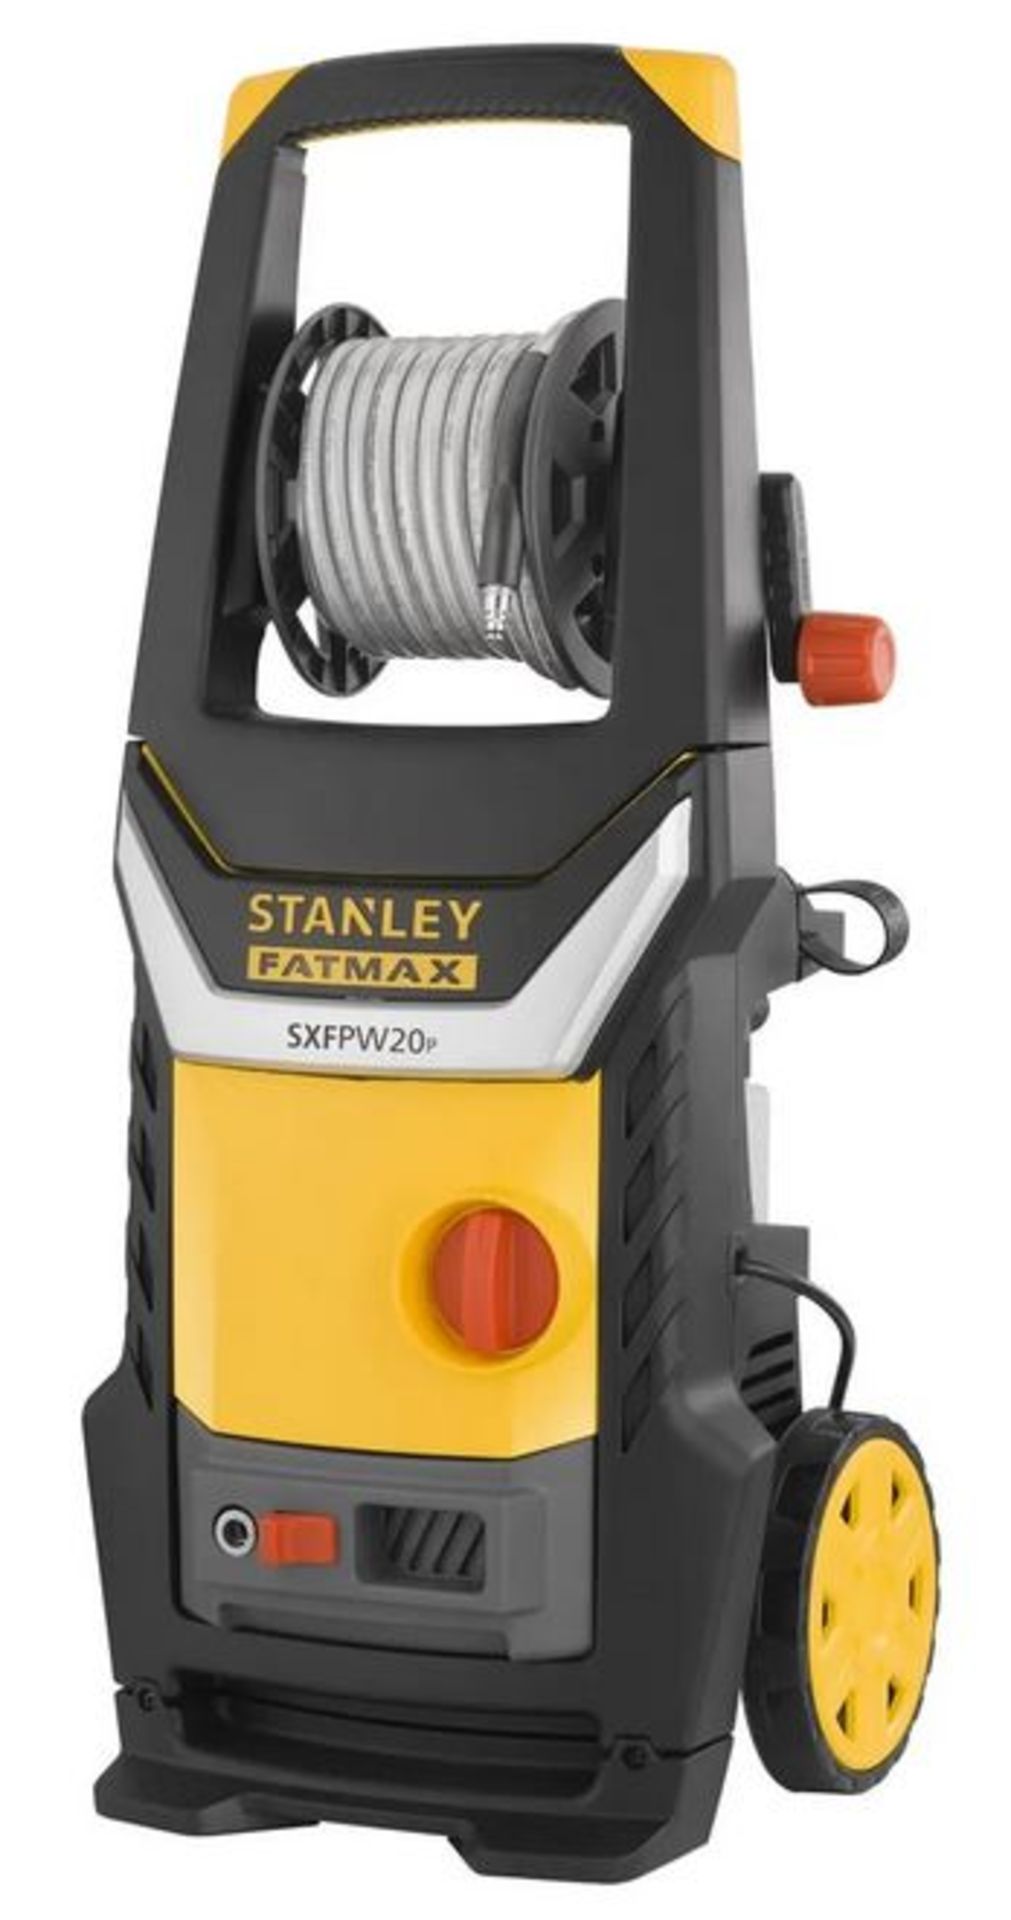 (R15G) 1x Stanley FatMax SXFPW20p High Pressure Washer - Image 2 of 3